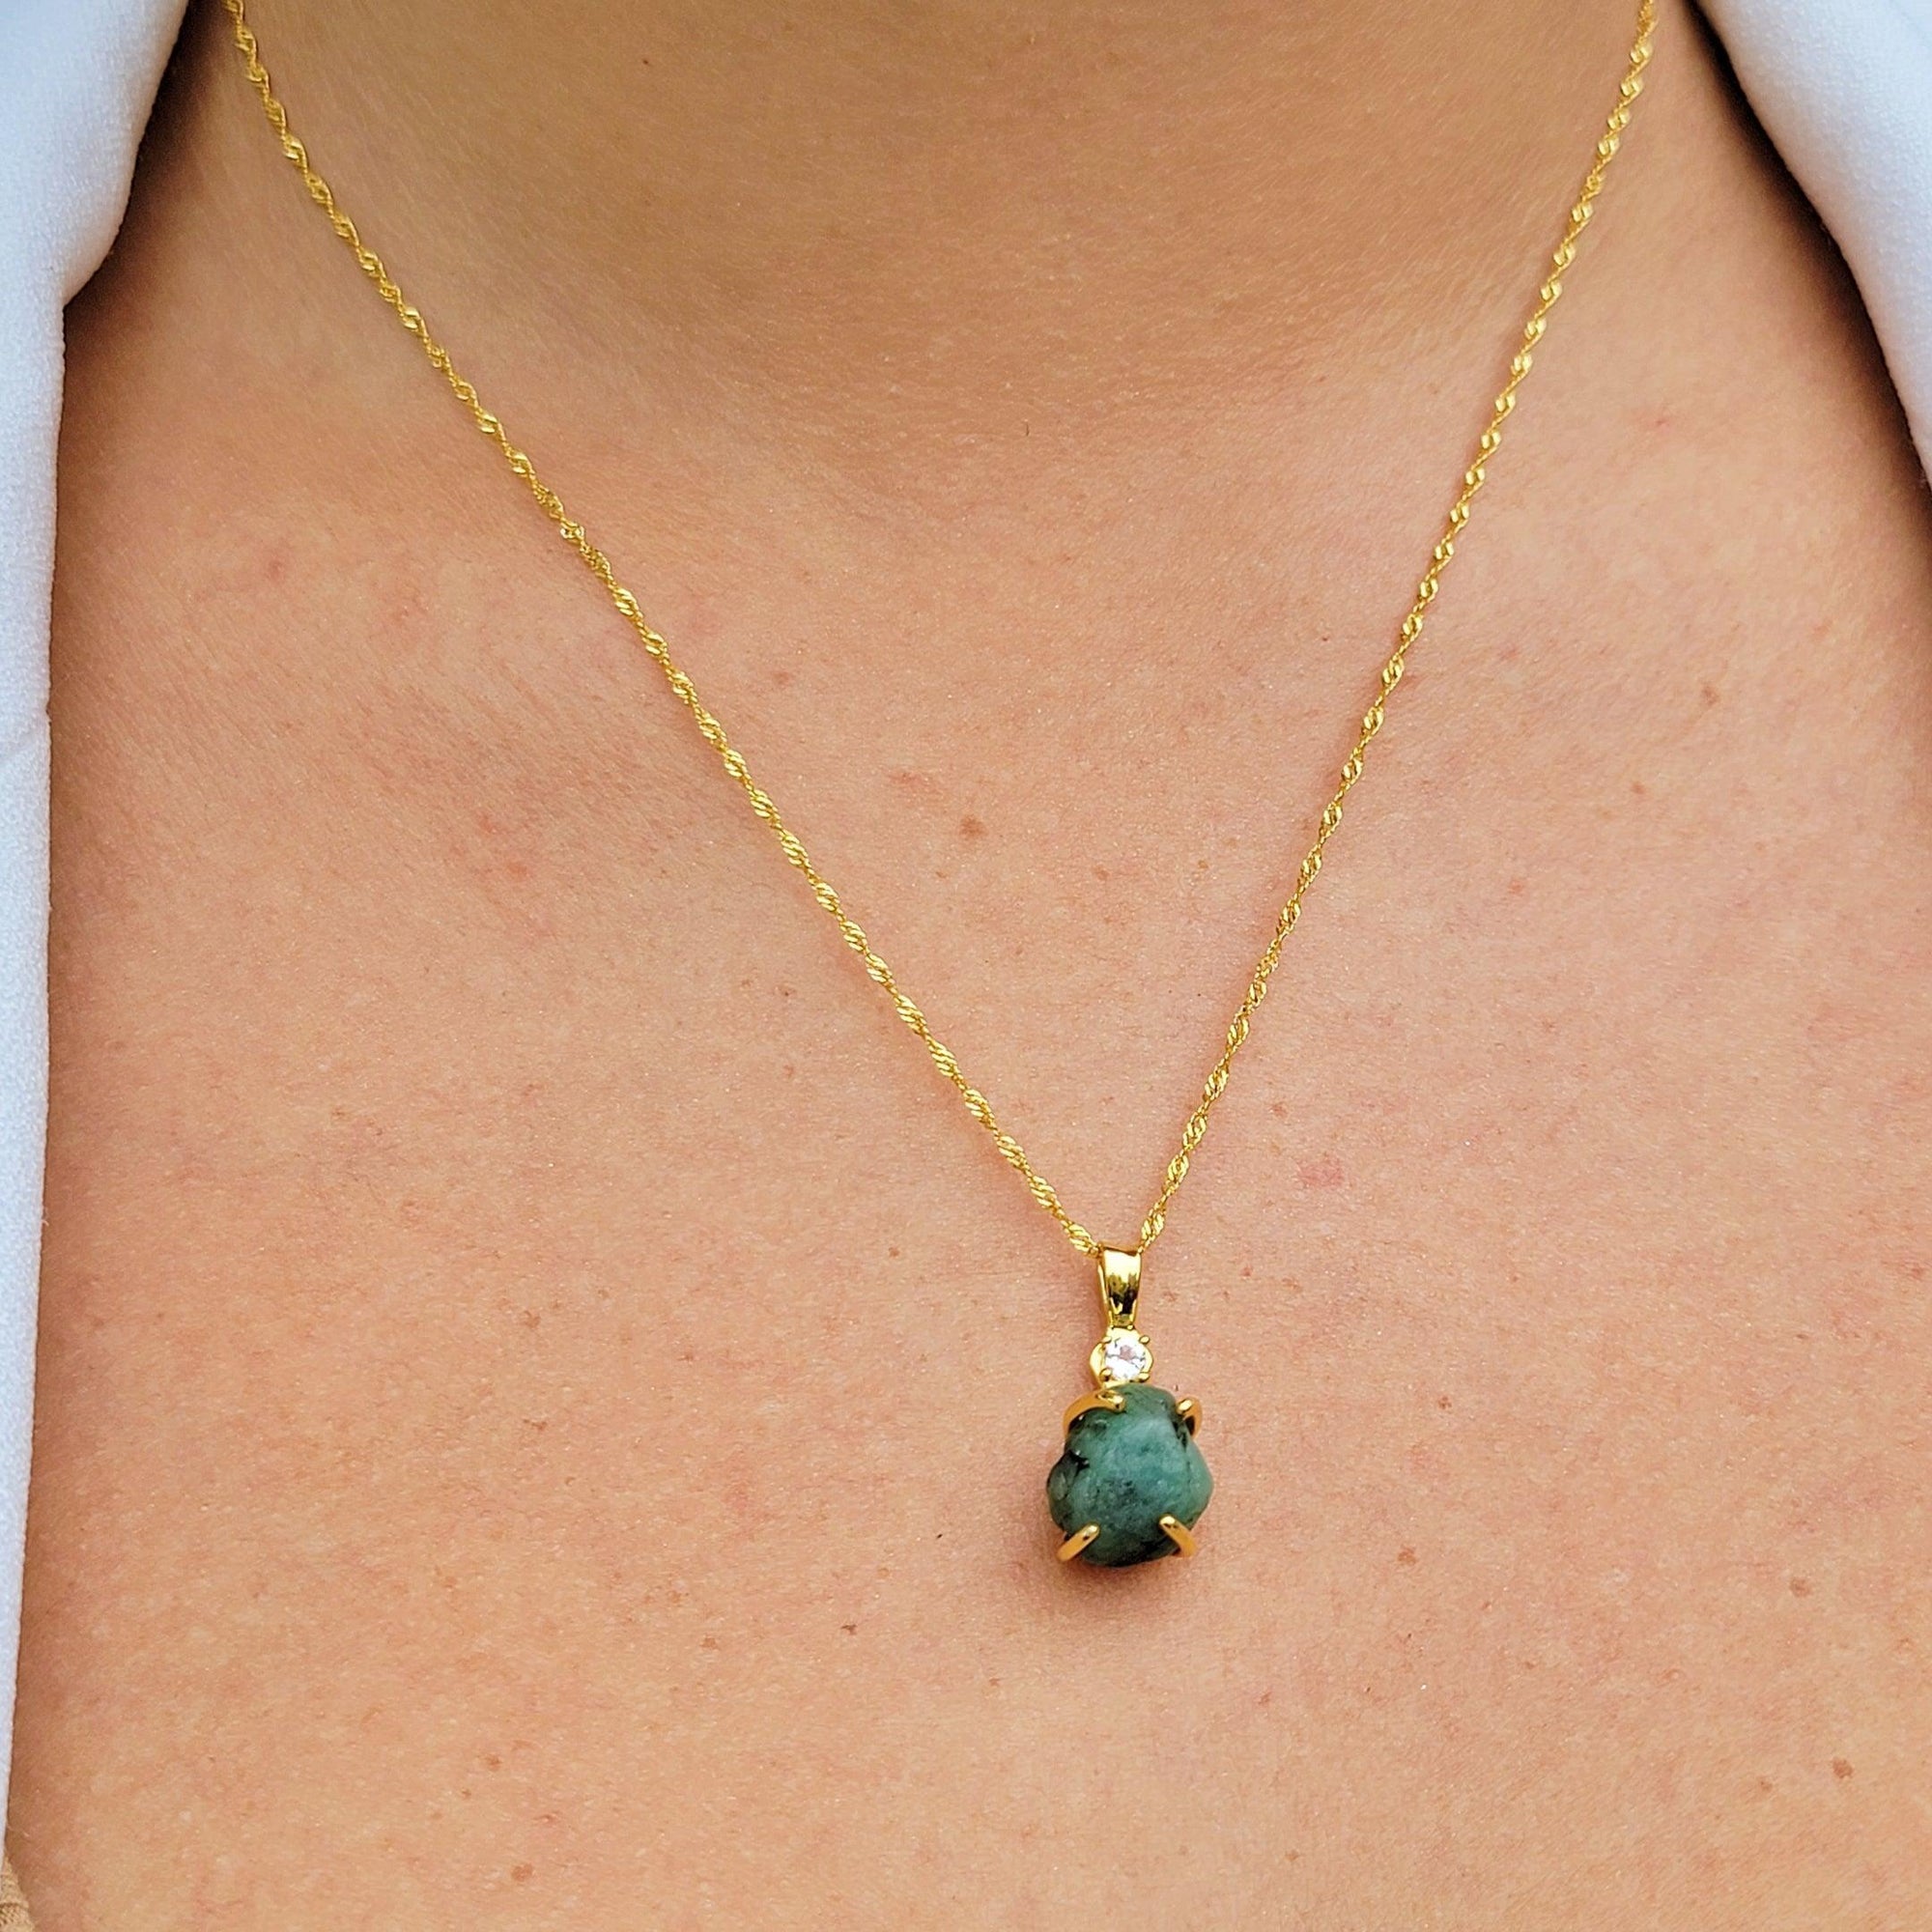 Real Raw Emerald Necklace - Uniquelan Jewelry